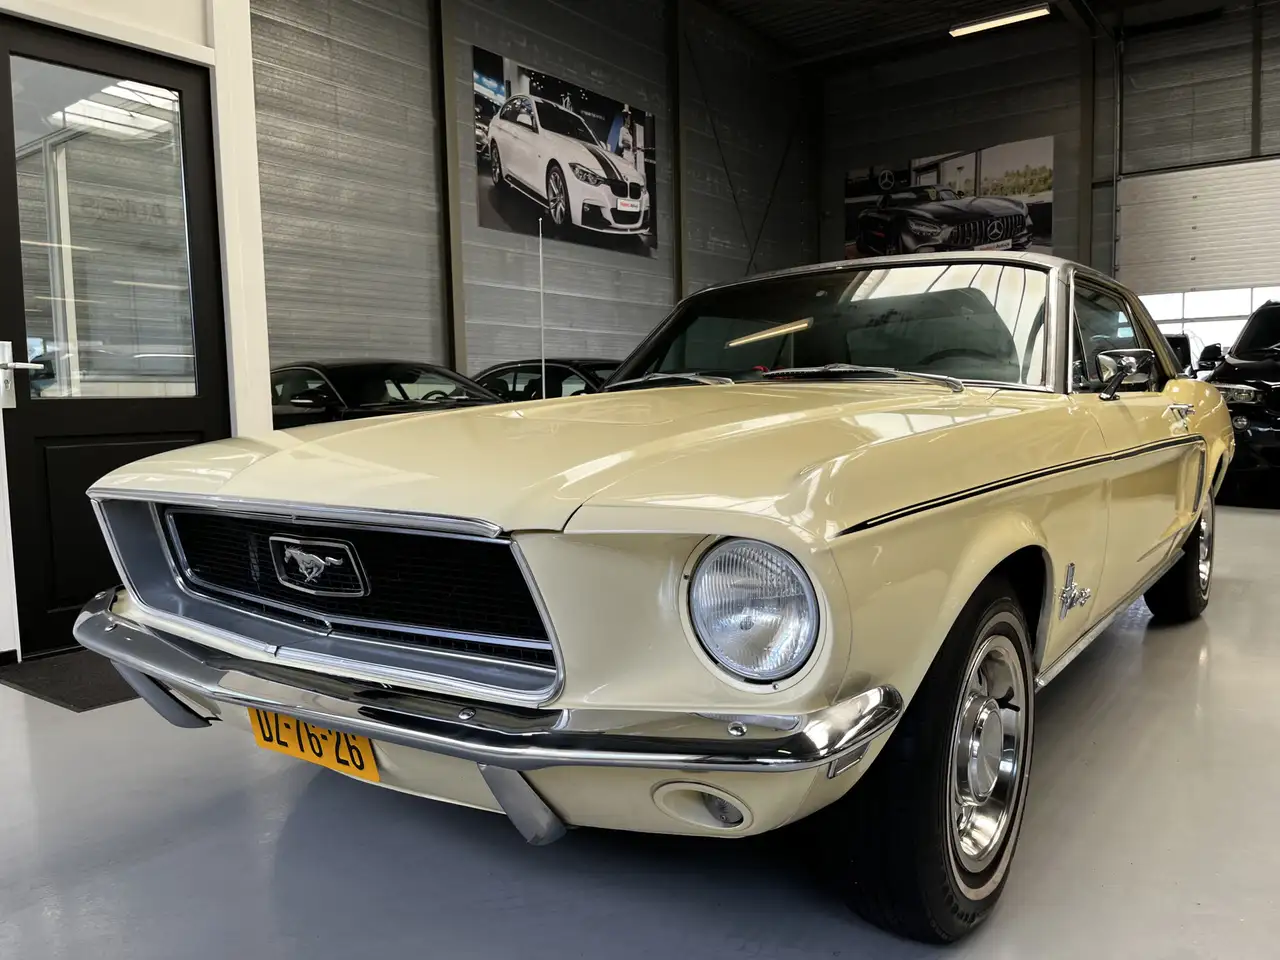 1968 - Ford Mustang Mustang Boîte automatique Coupé